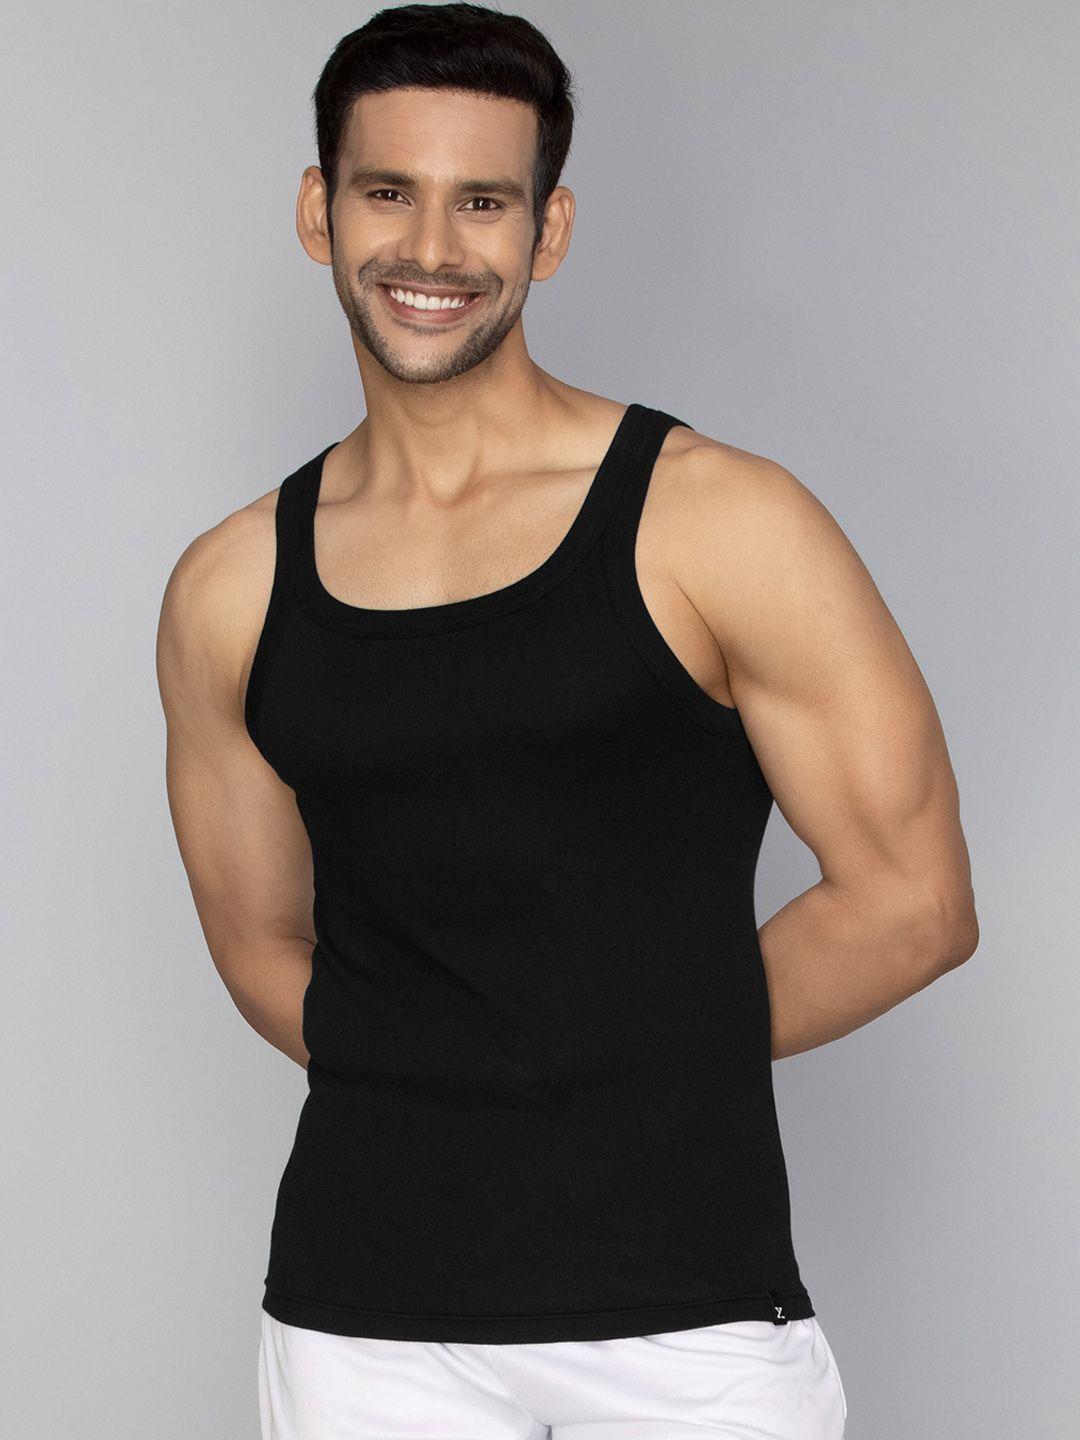 xyxx pace antibacterial breathable cotton gym vests